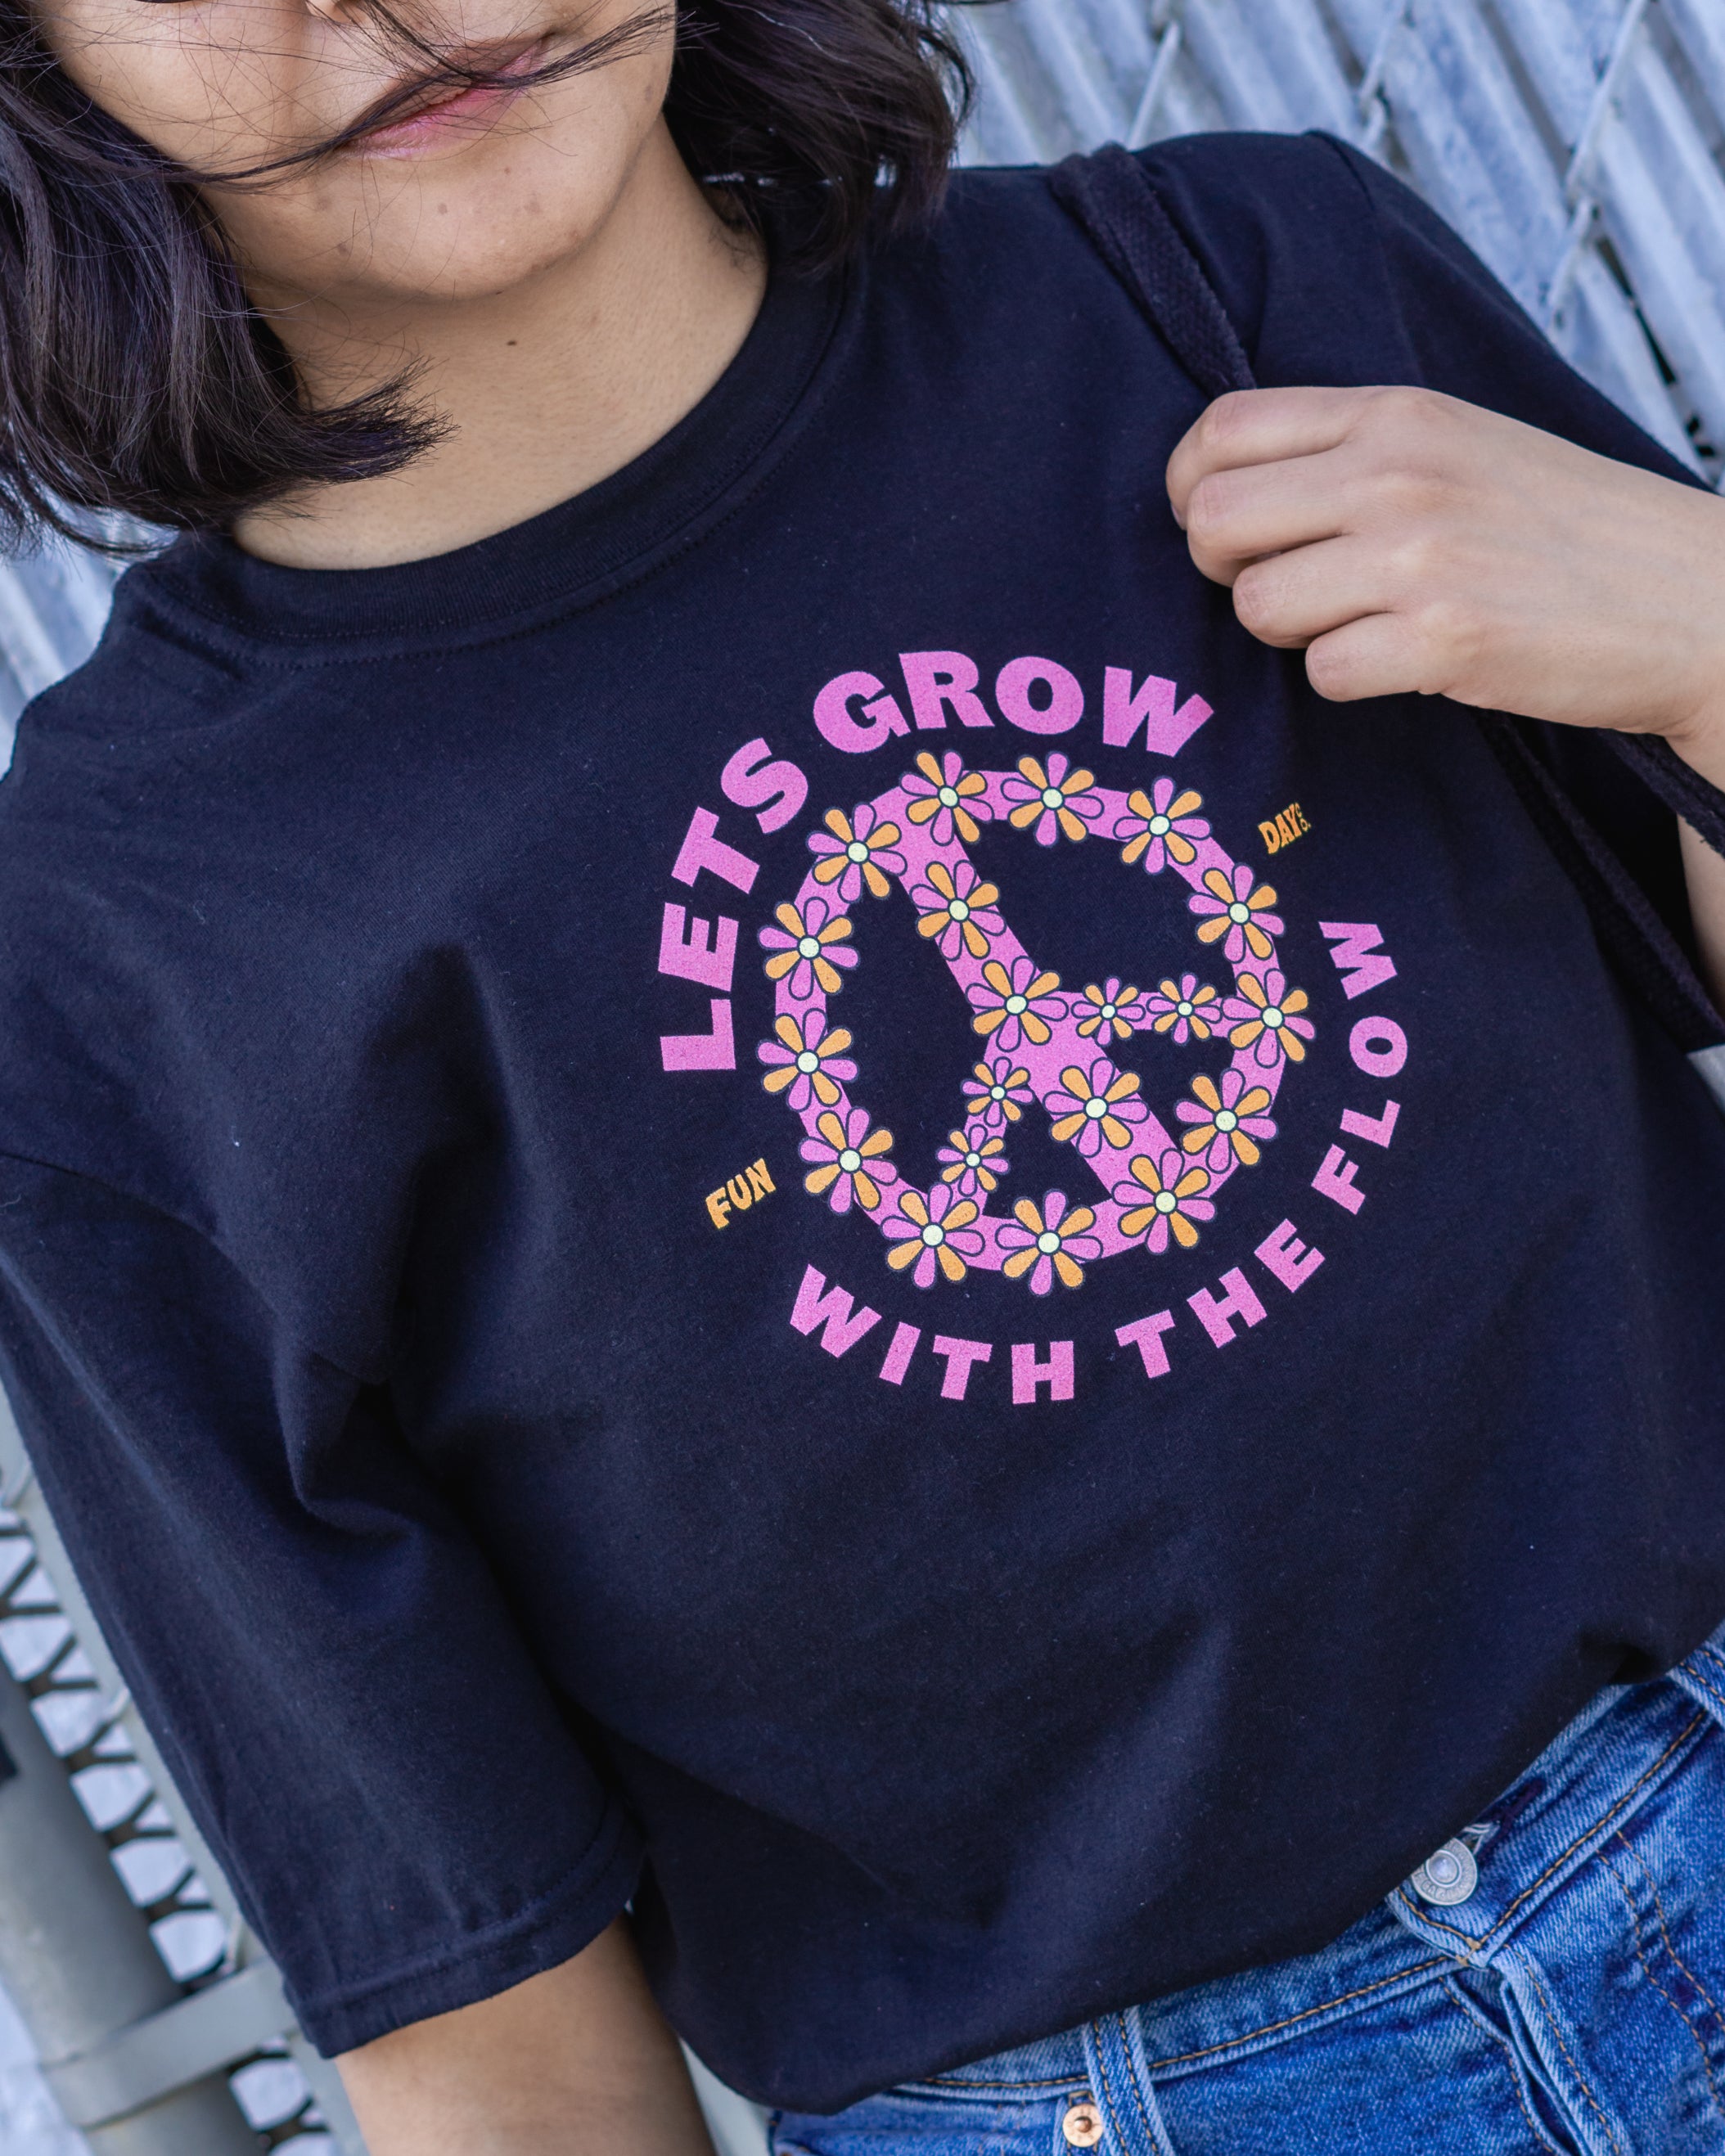 Grow with the flow (Unisex recycled t-shirt)